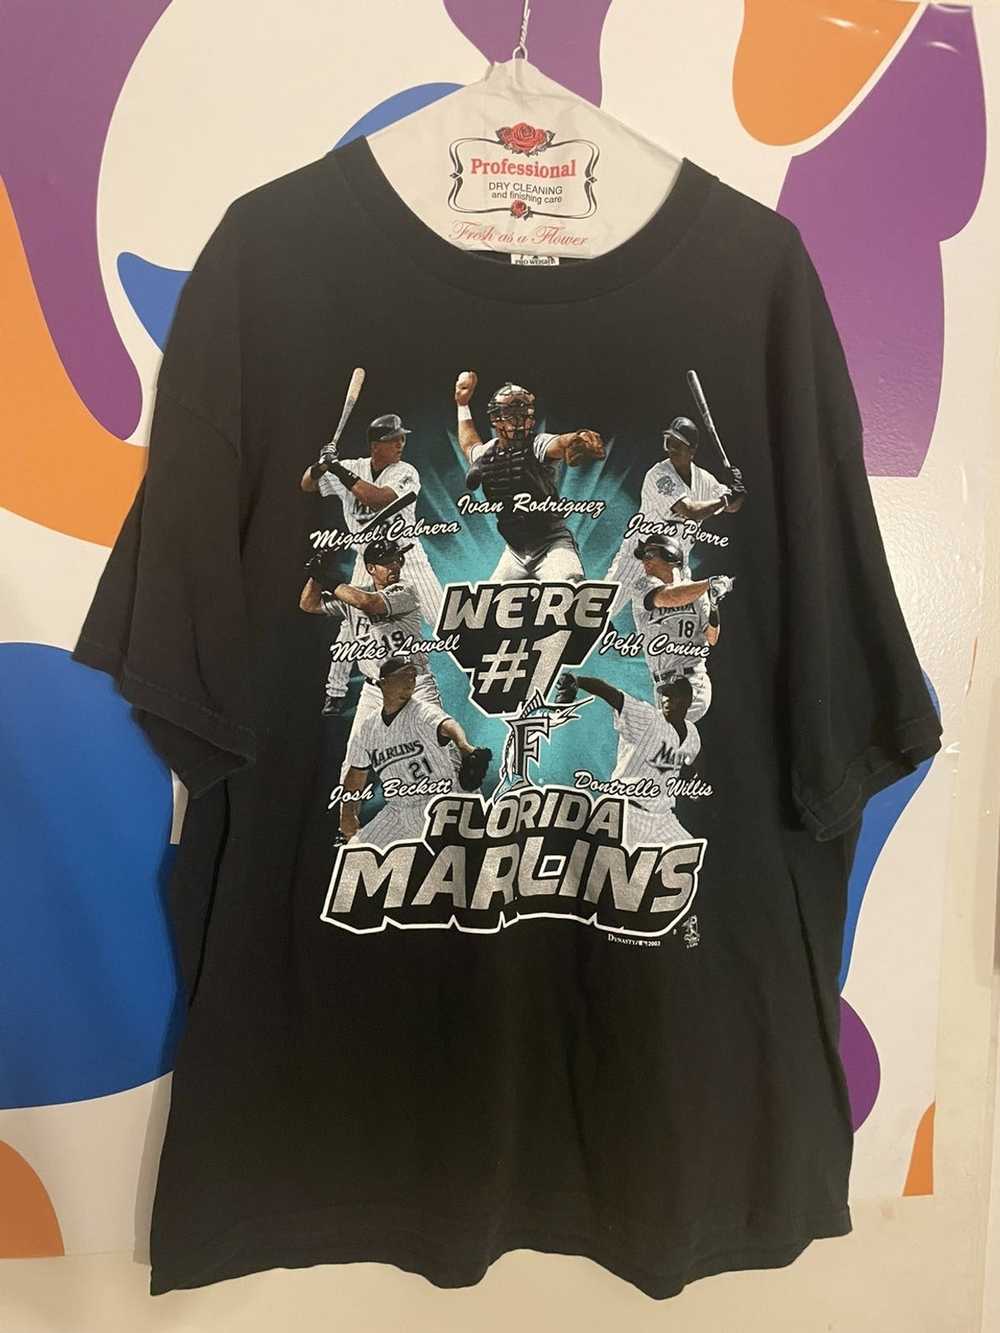 Vintage Florida Marlins Miguel Cabrera Youth Jersey. Size Youth Large.